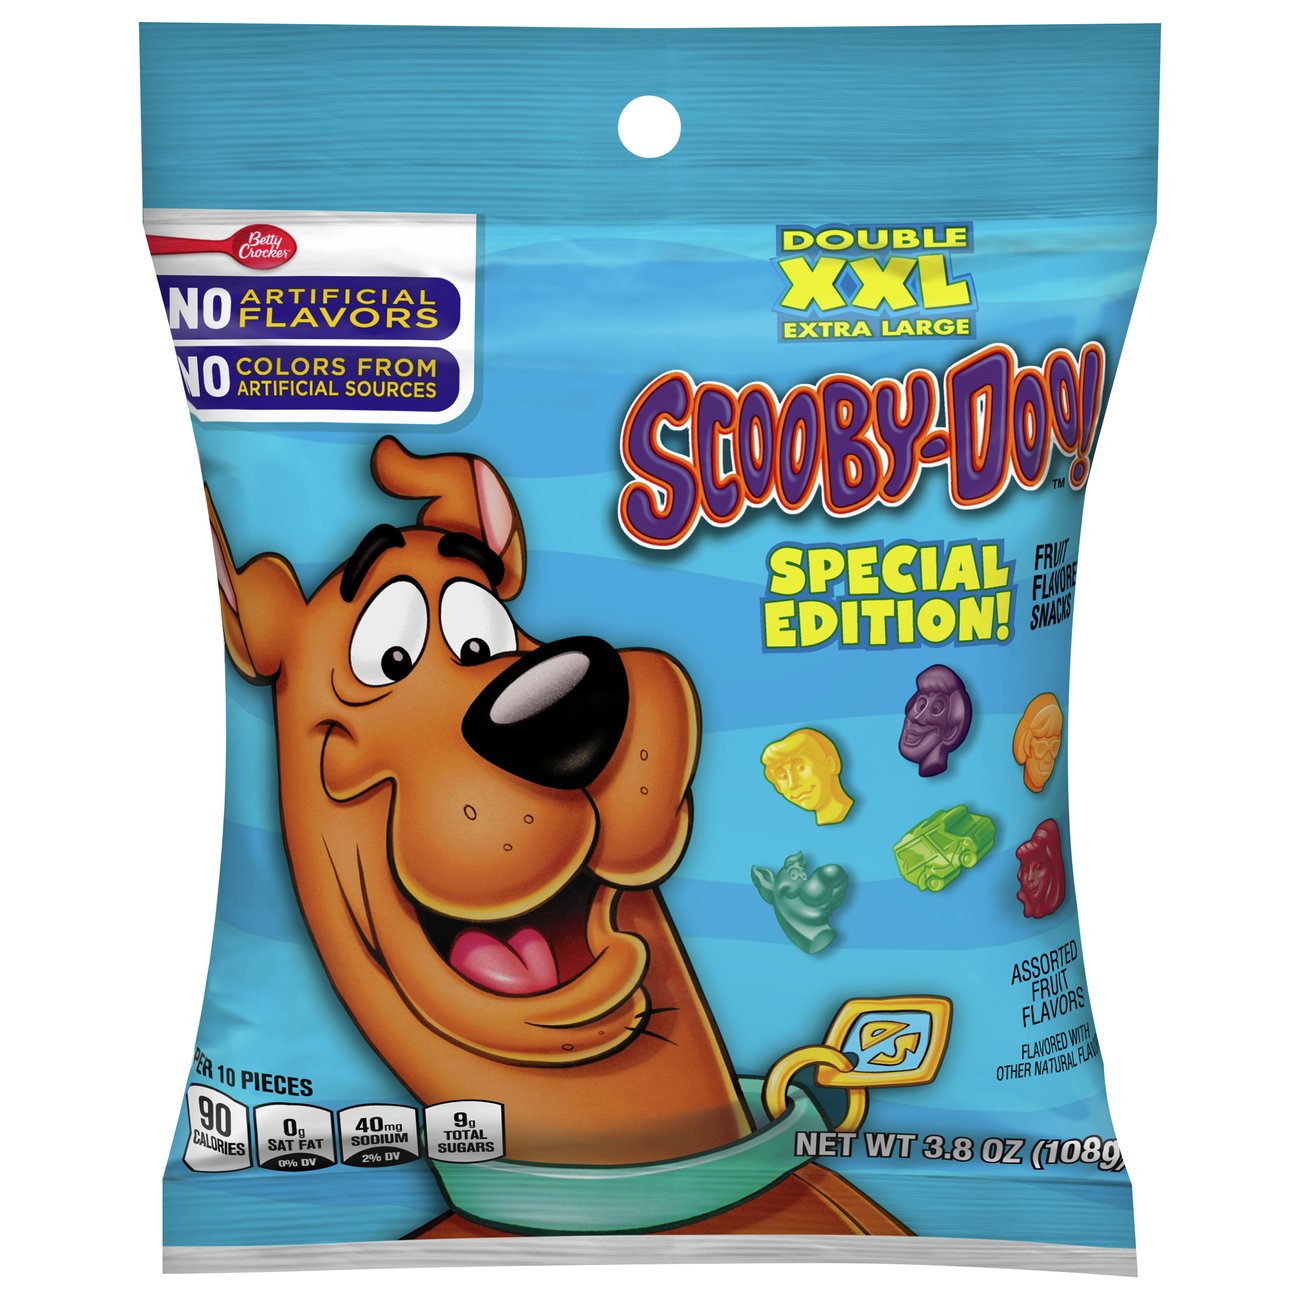 Betty Scooby-Doo! Assorted Flavored Snack - Shop Snacks Candy at H-E-B